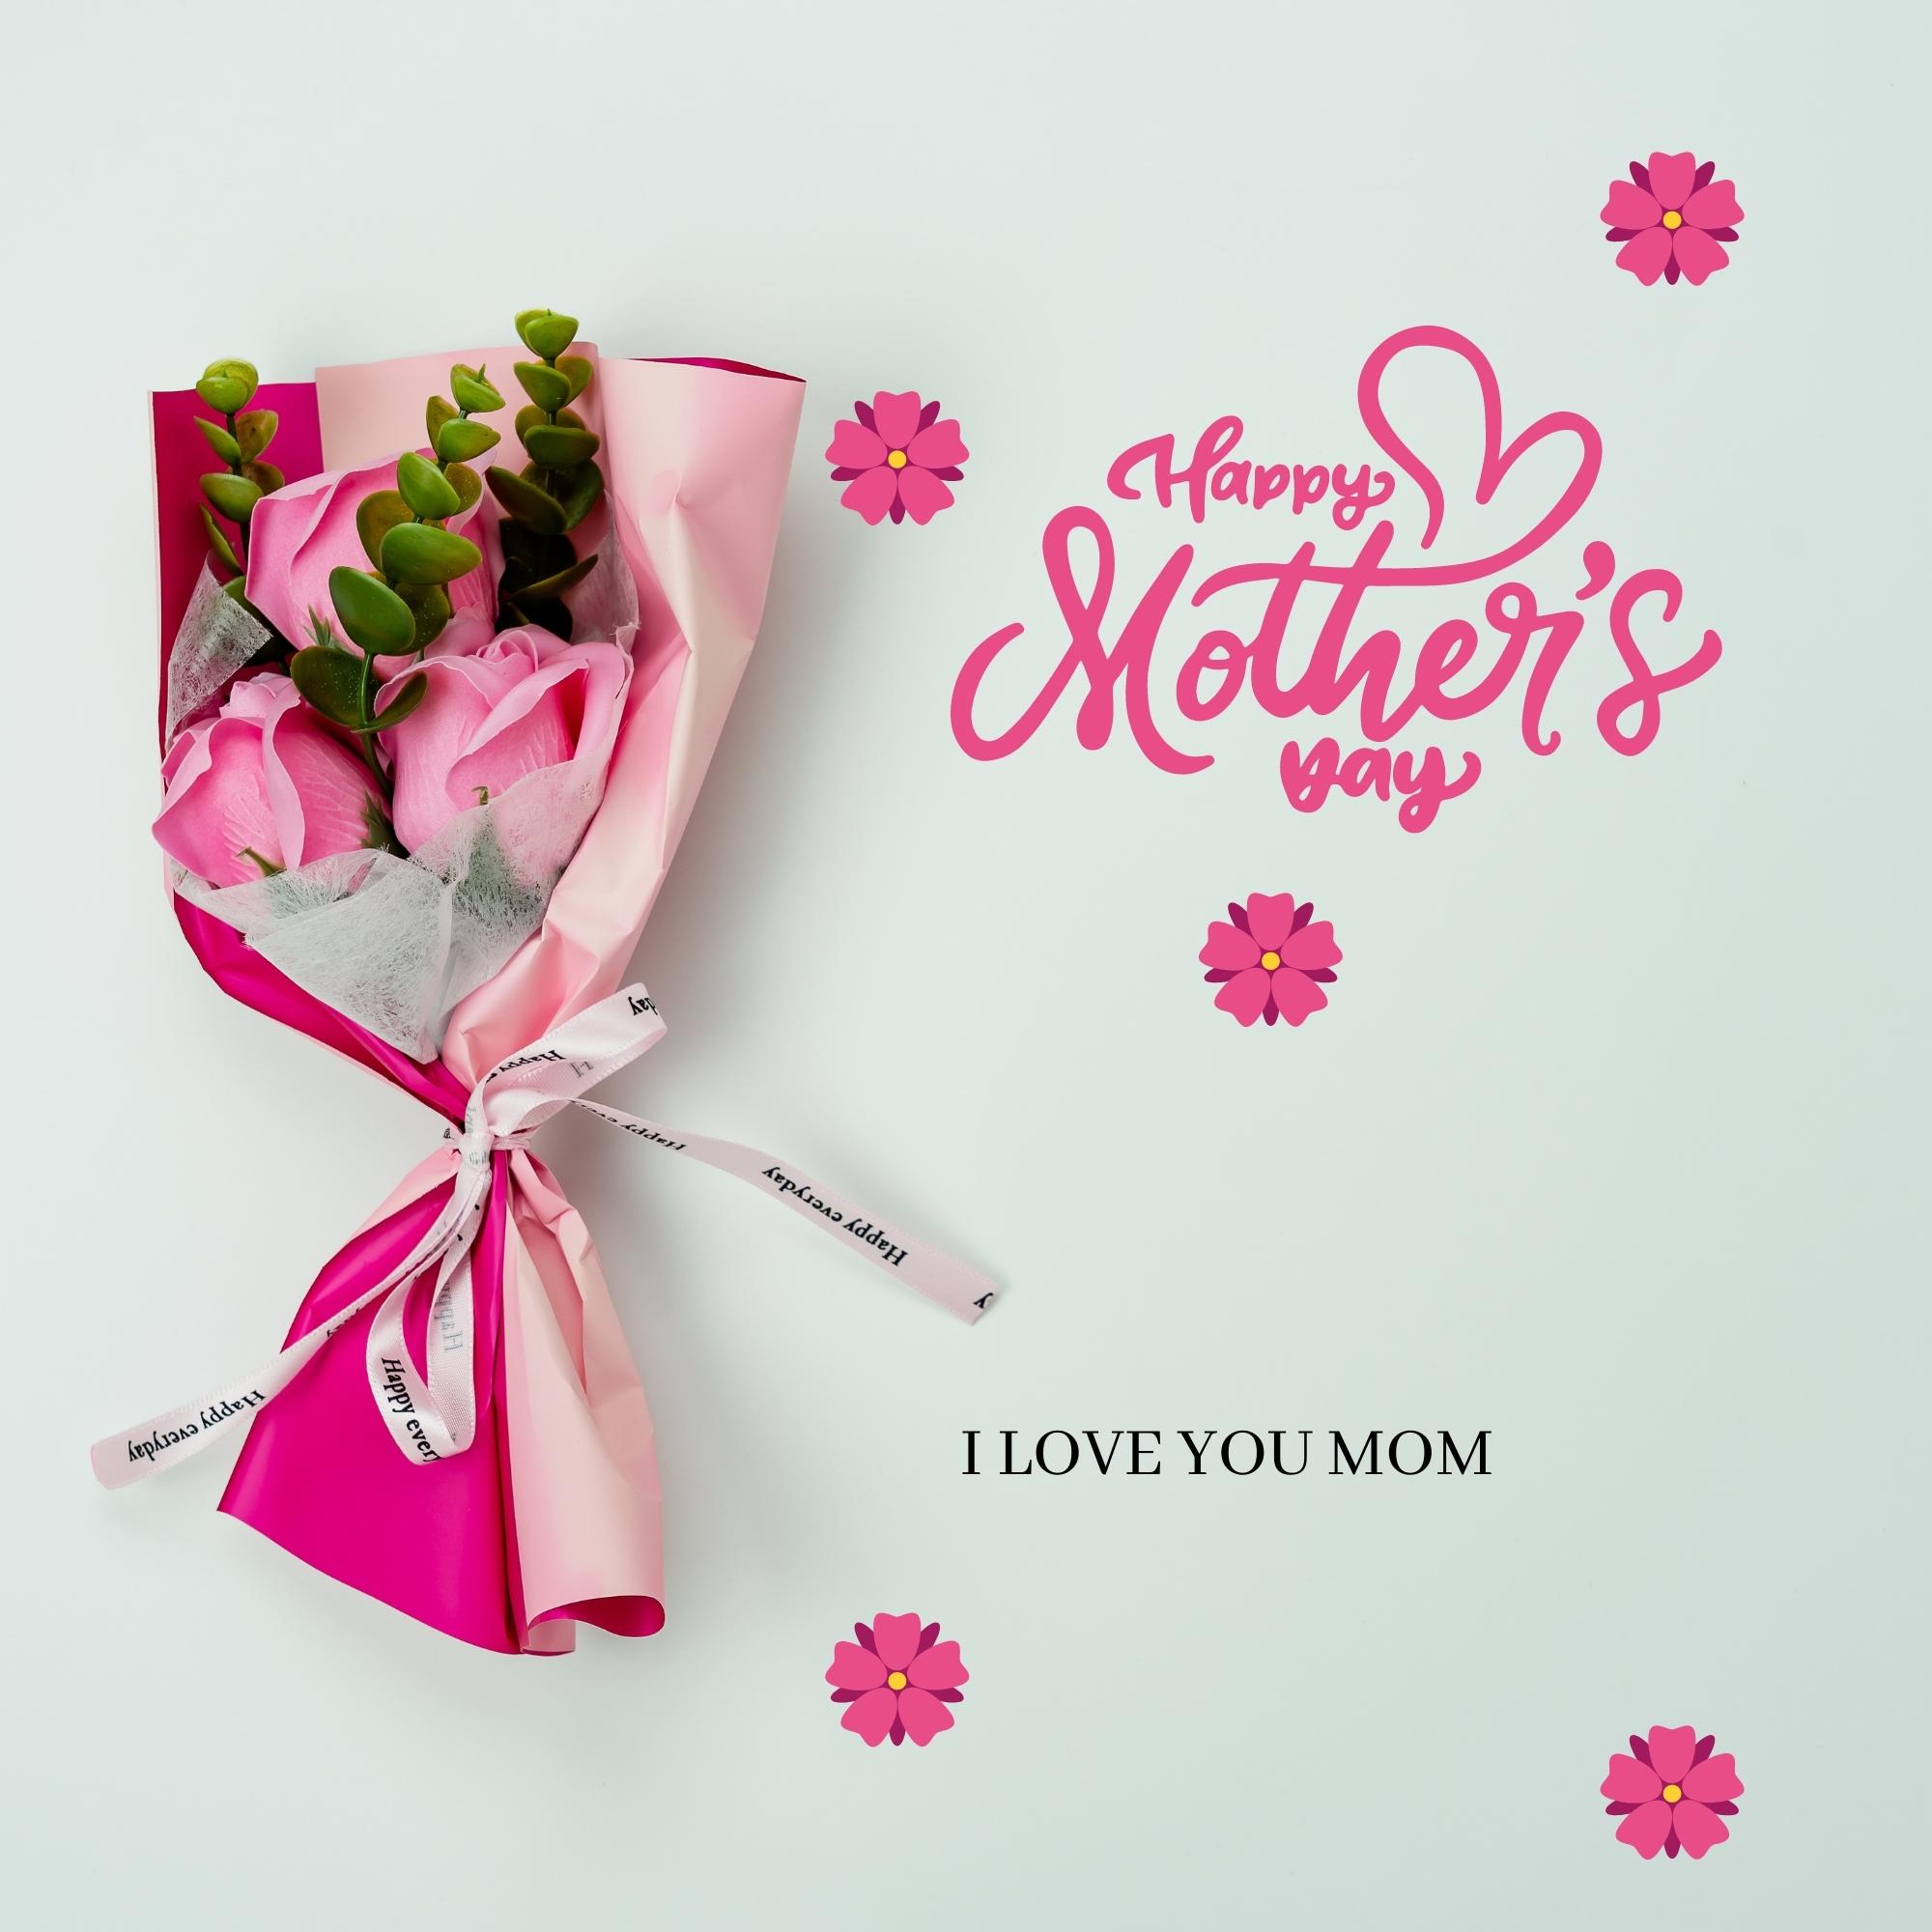 Happy Mothers Day Images | 1036 | Free Download [8k,4k,Hd]